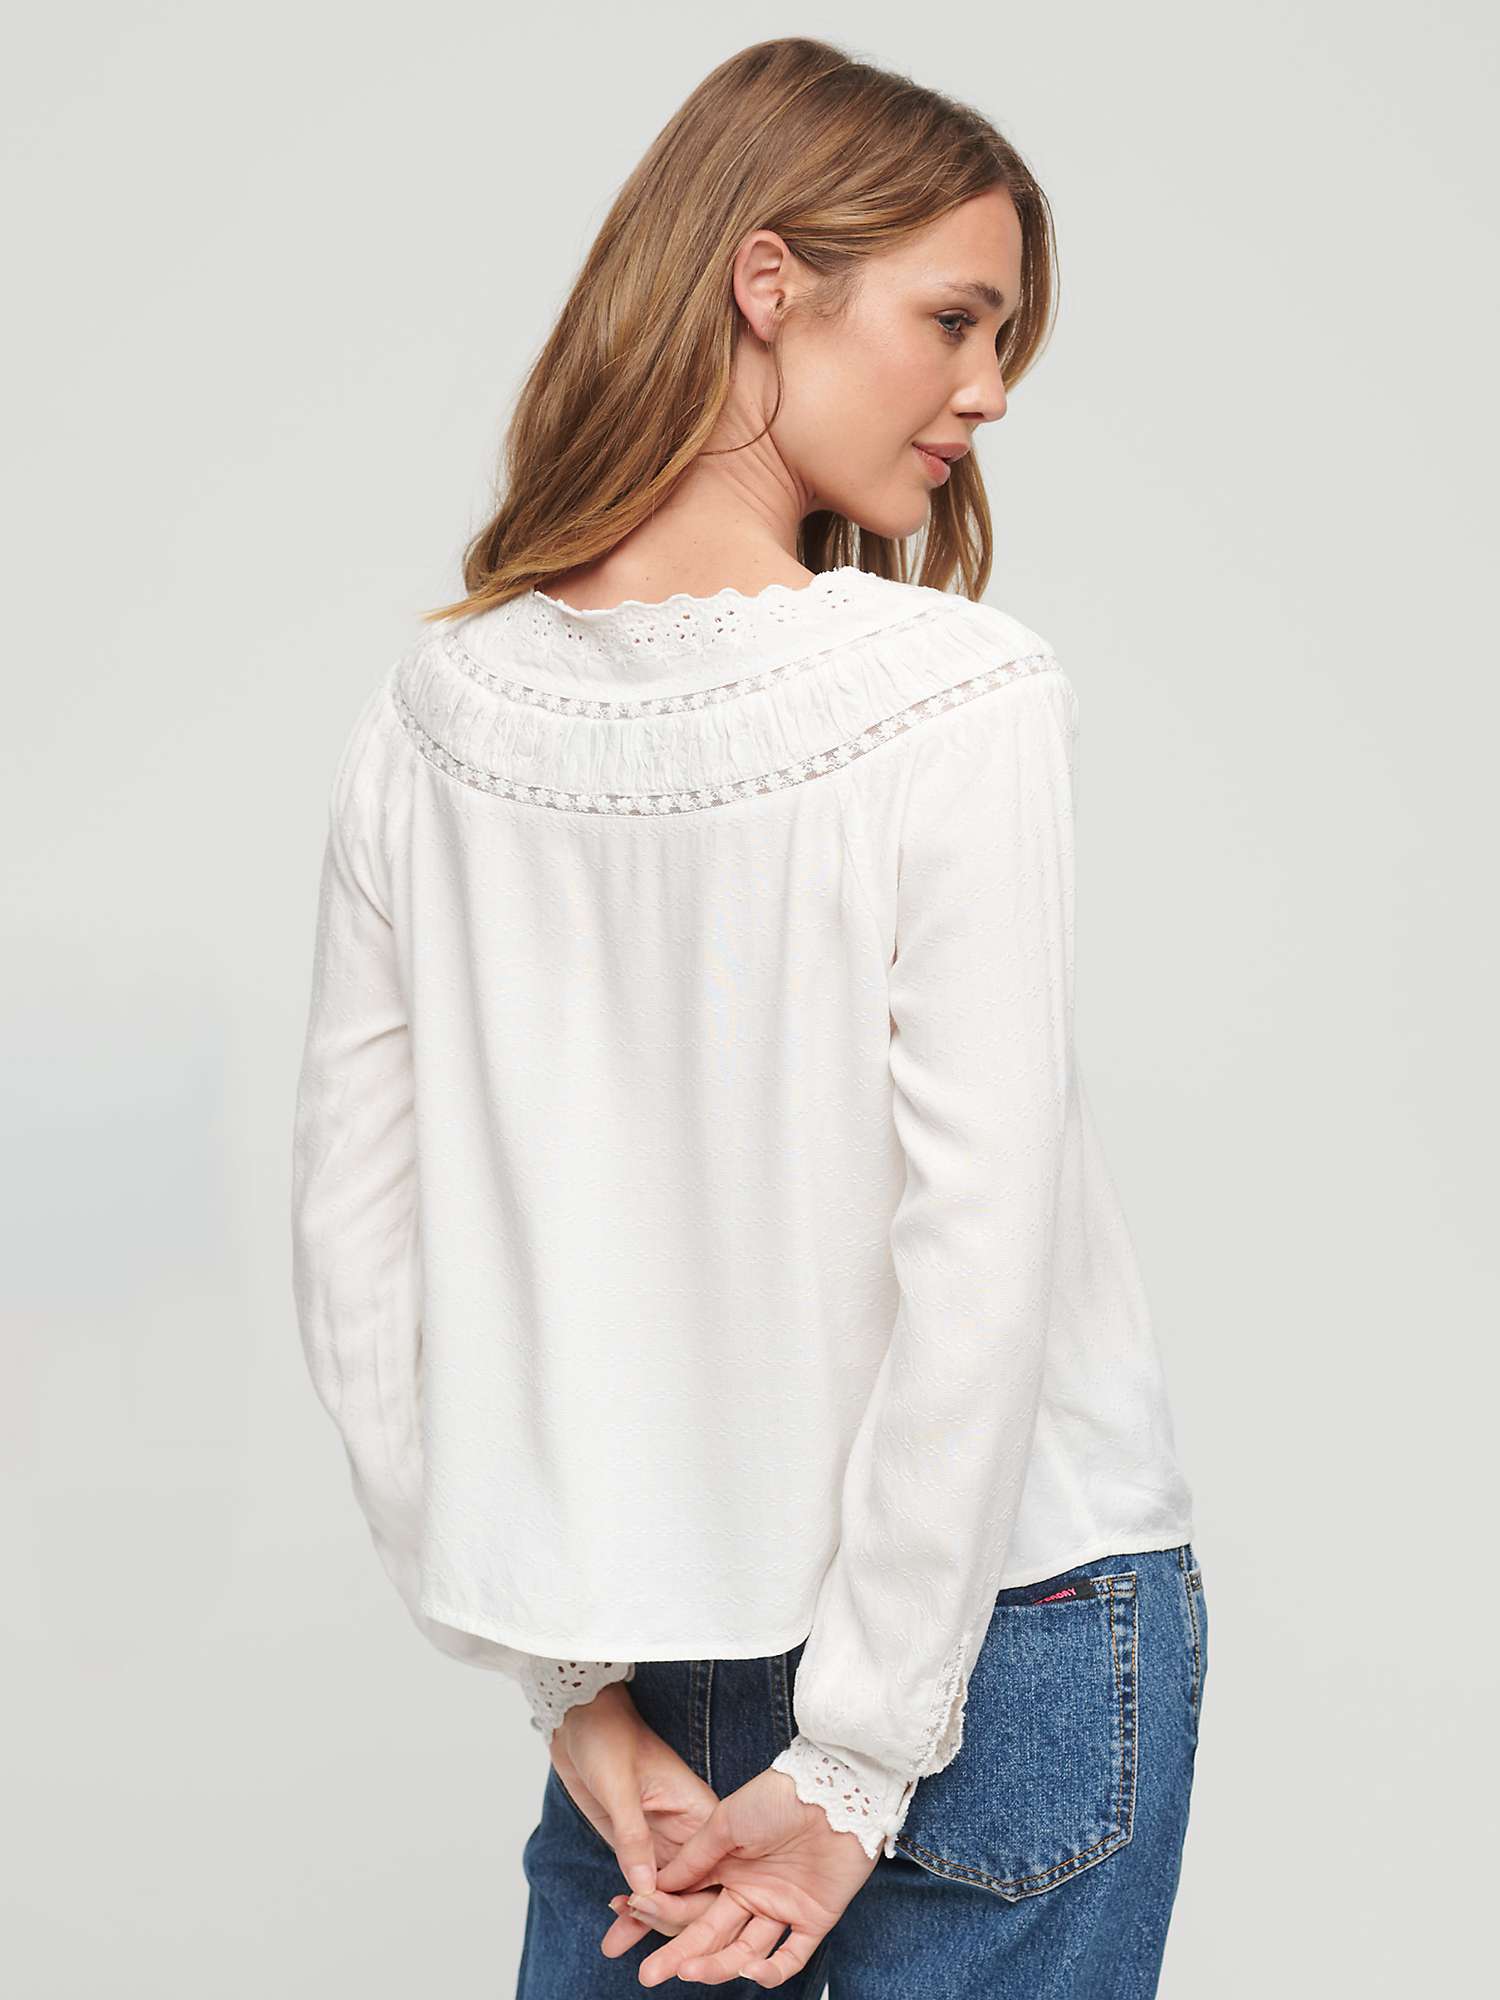 Buy Superdry Lace Trim Woven Top, Ecru Online at johnlewis.com